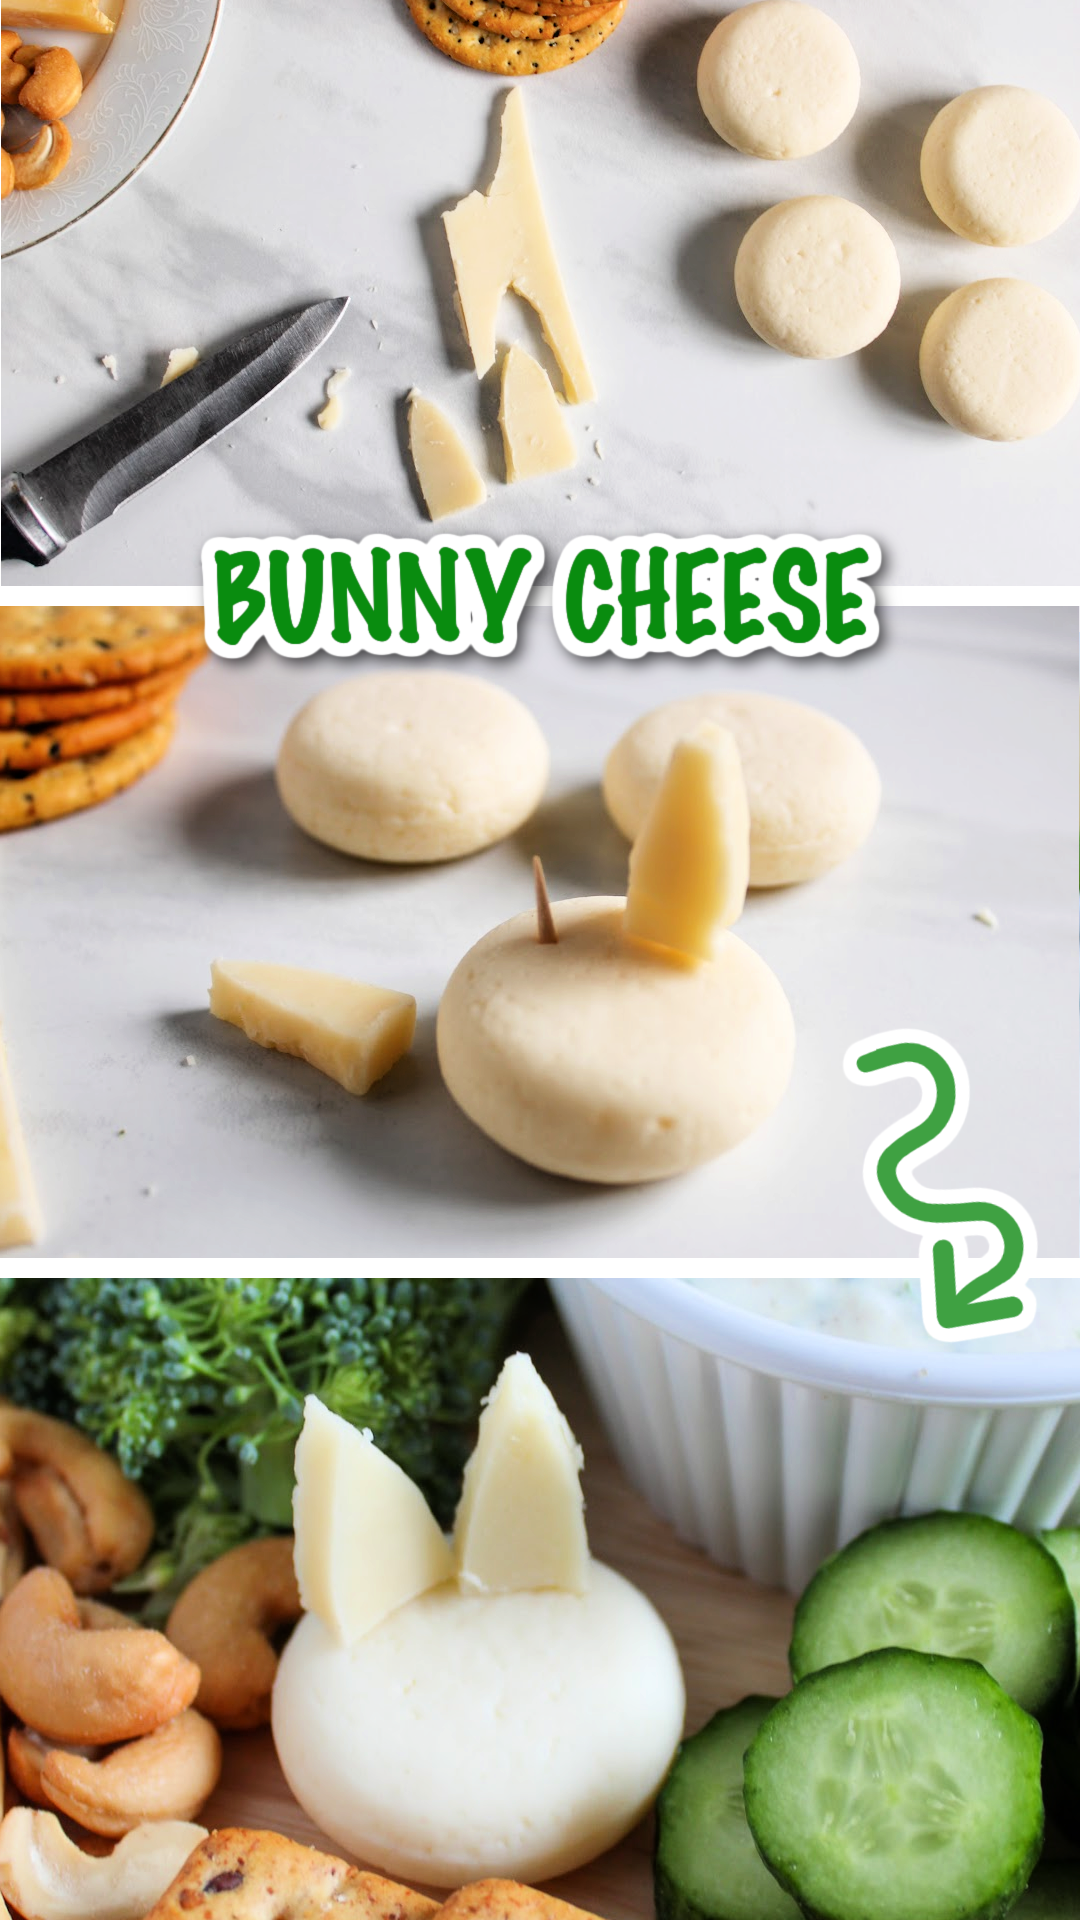 How to make bunny cheeses using two types of cheese.